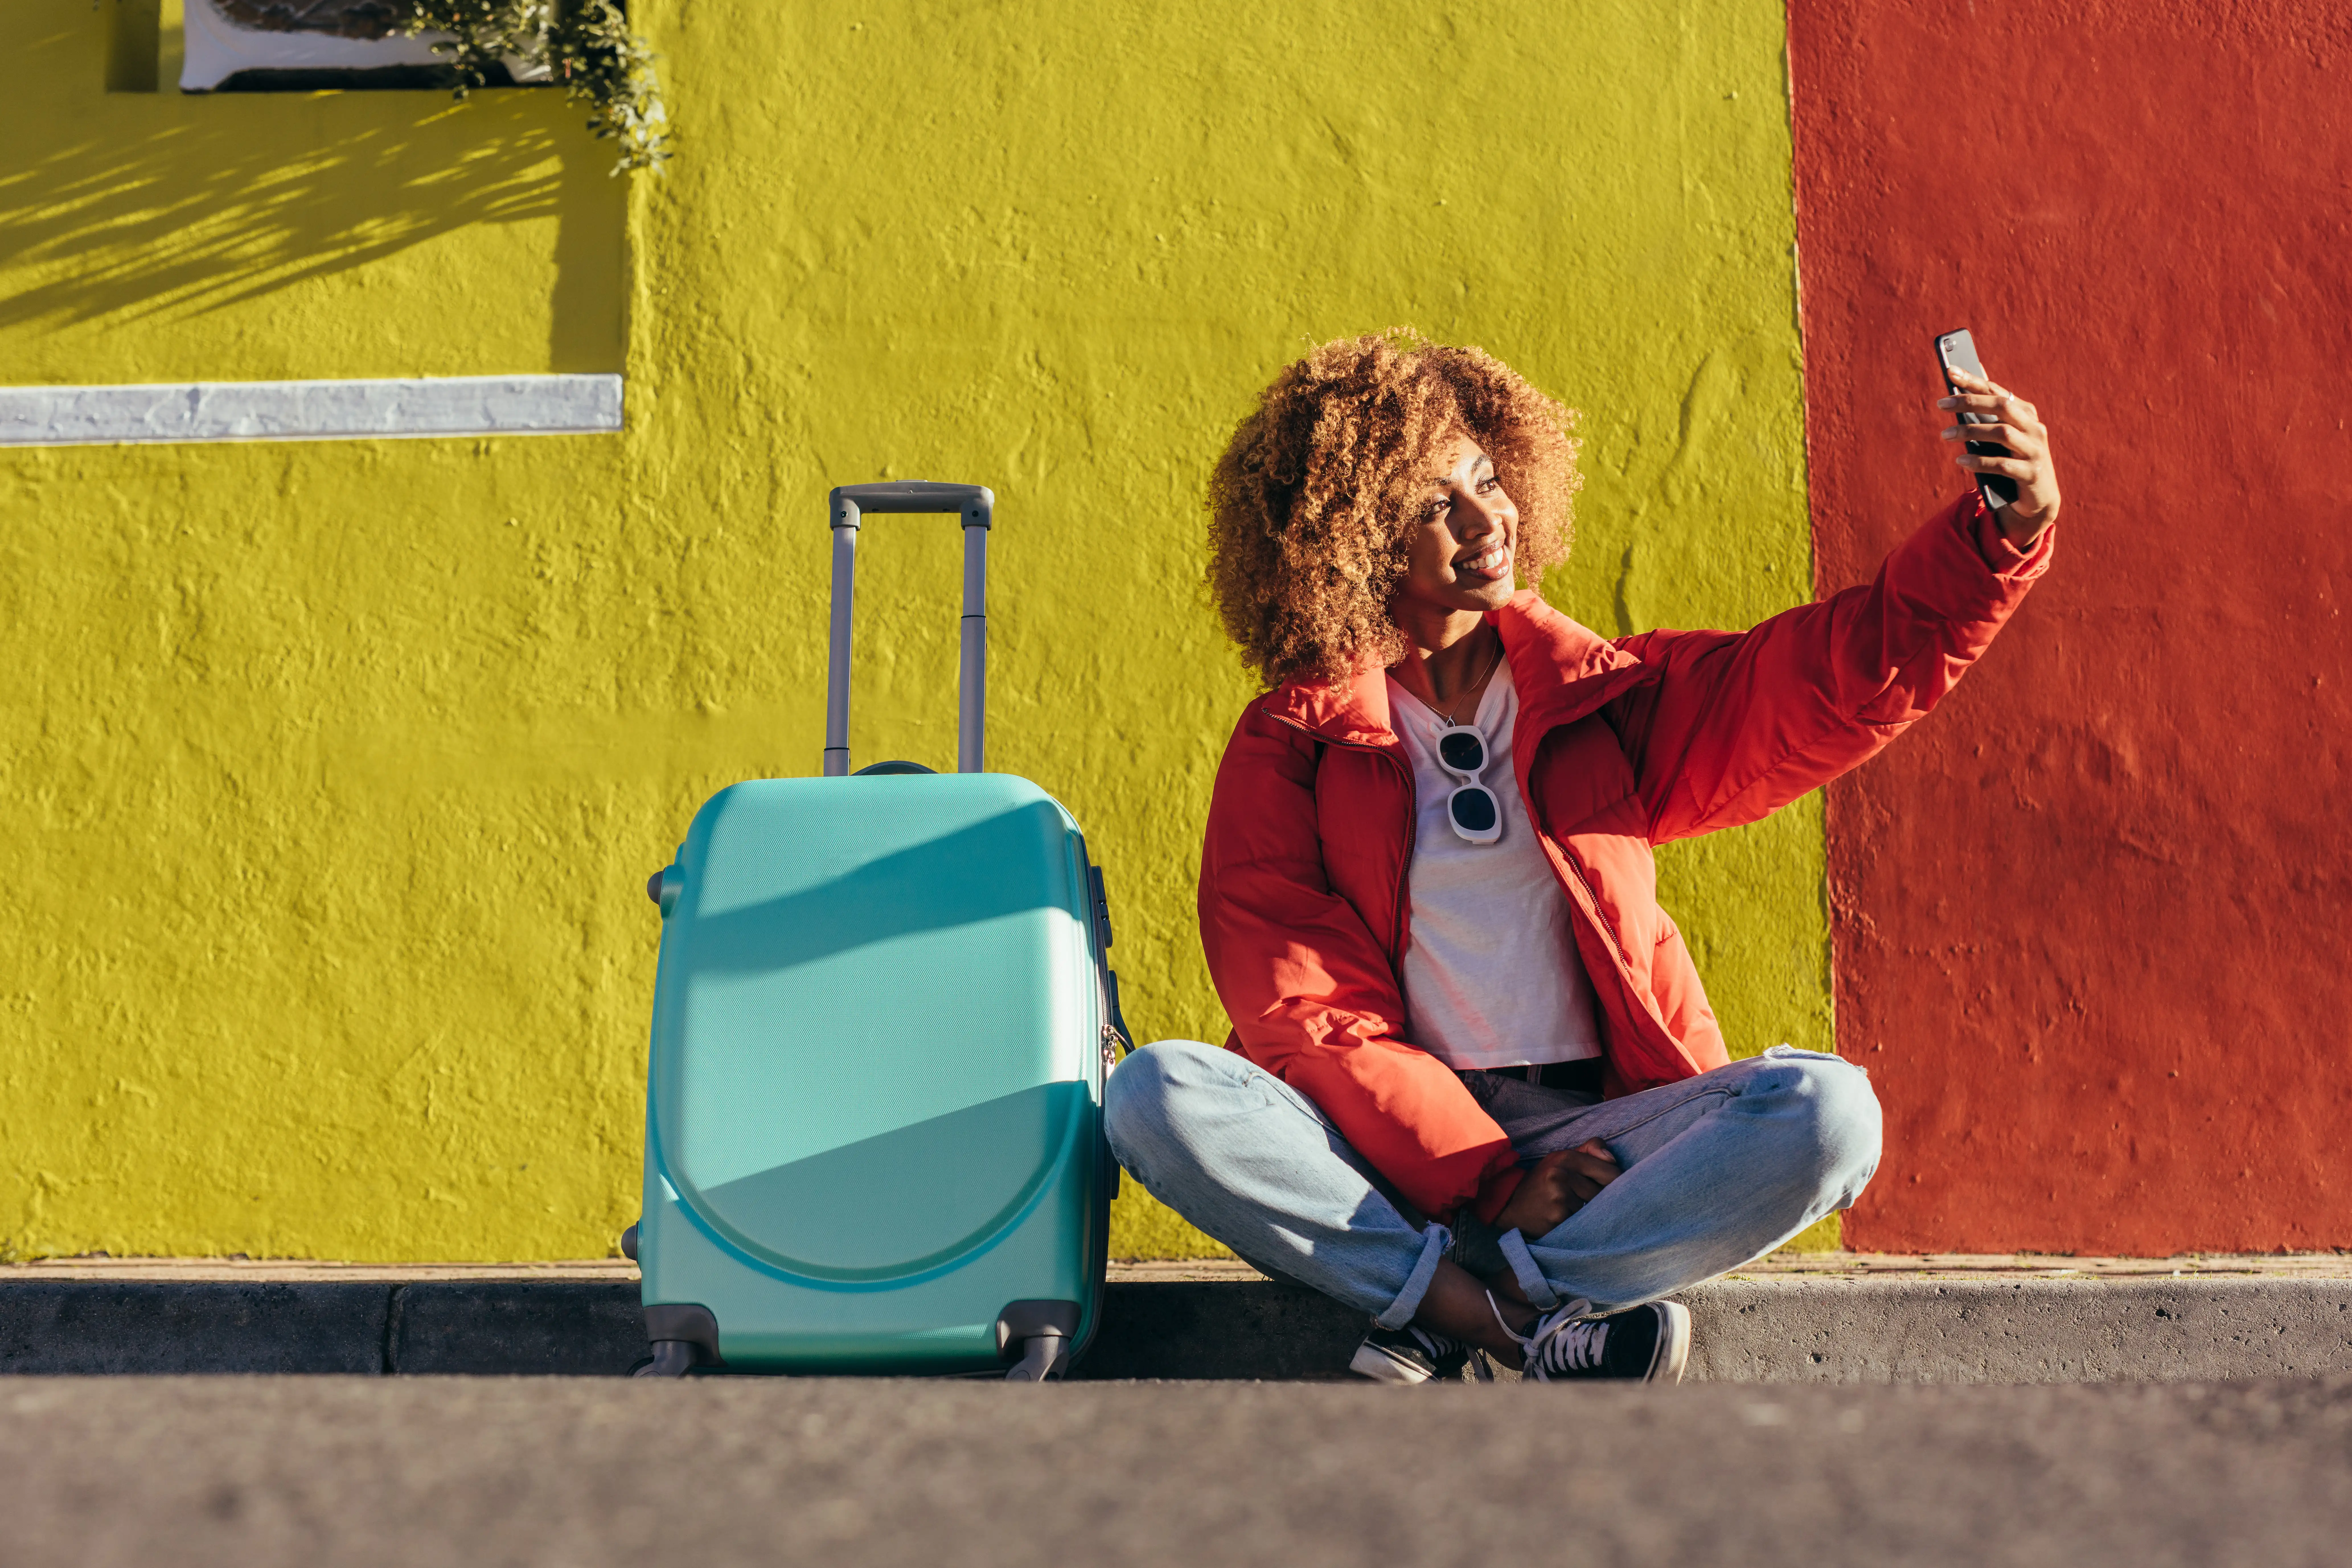 Woman taking selfie in front of a brightly colored wall next to a suitcase